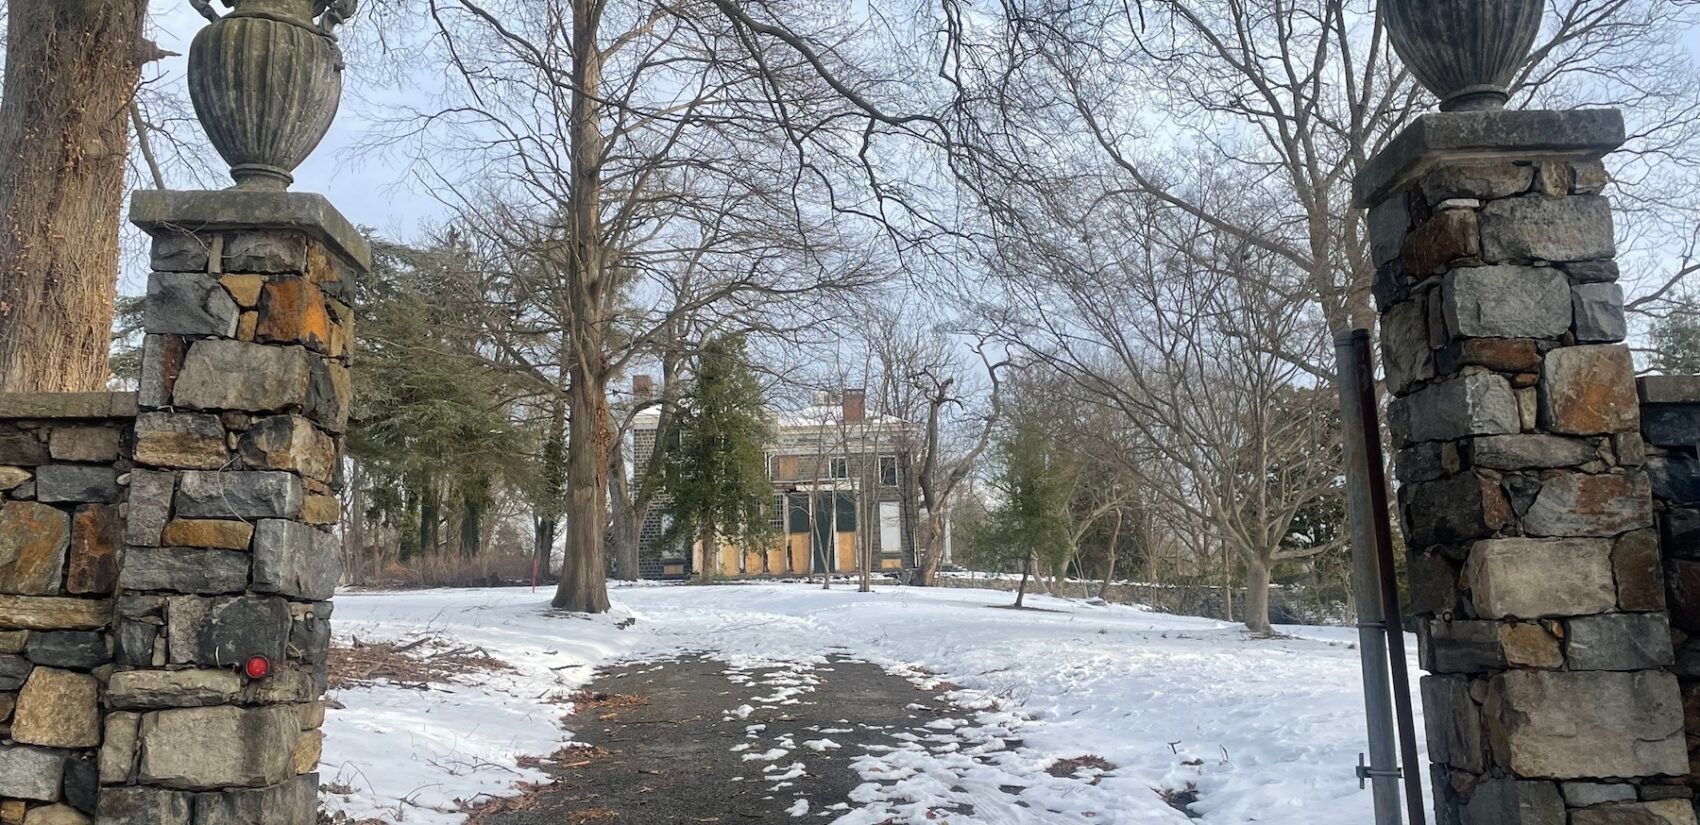 A view of the mansion from the front gate